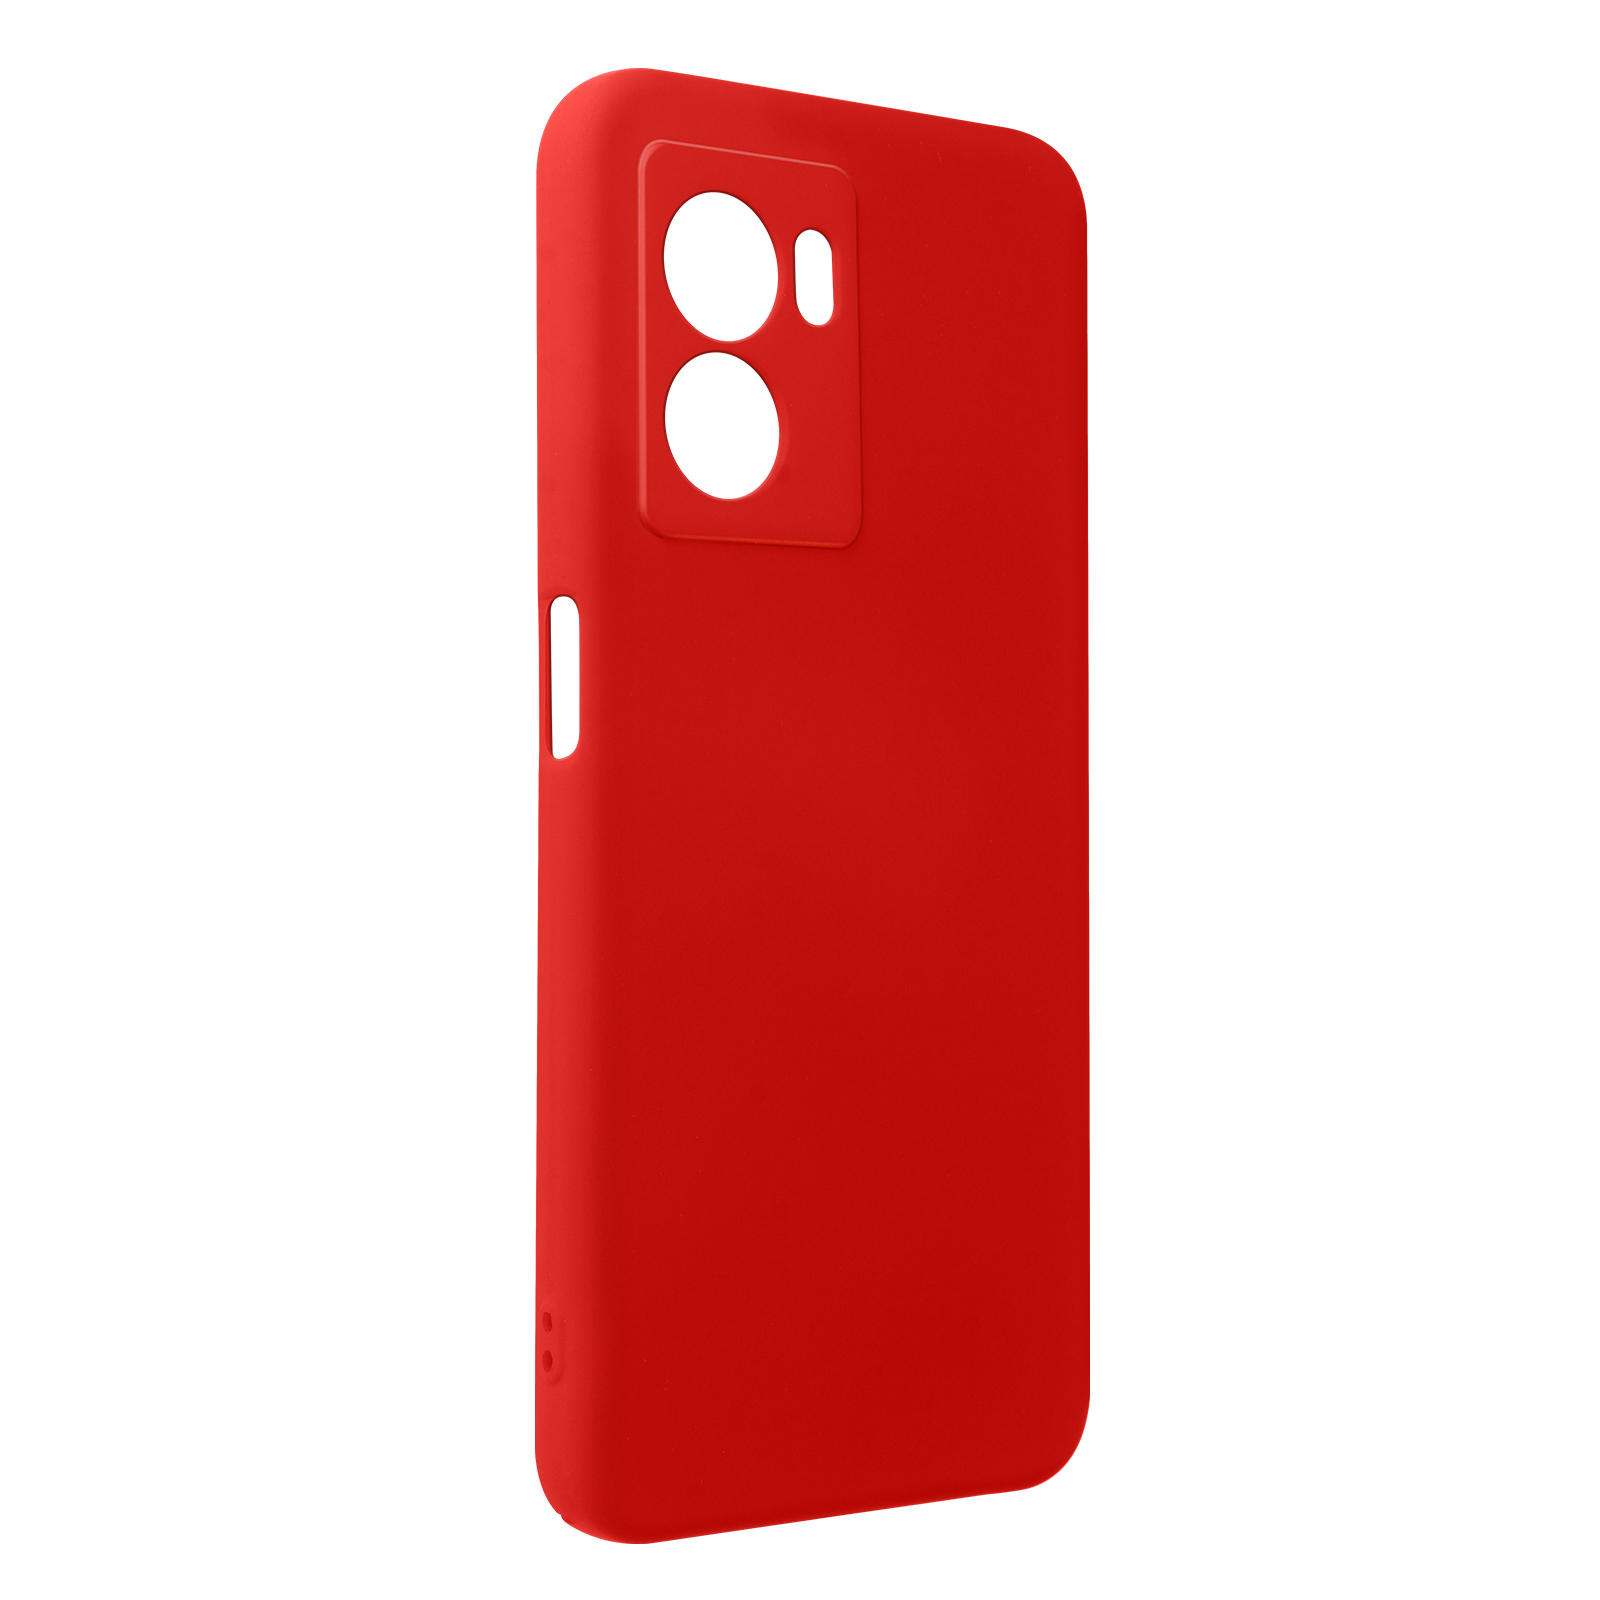 AVIZAR Soft Touch Series, Backcover, Oppo, Rot A57, Oppo